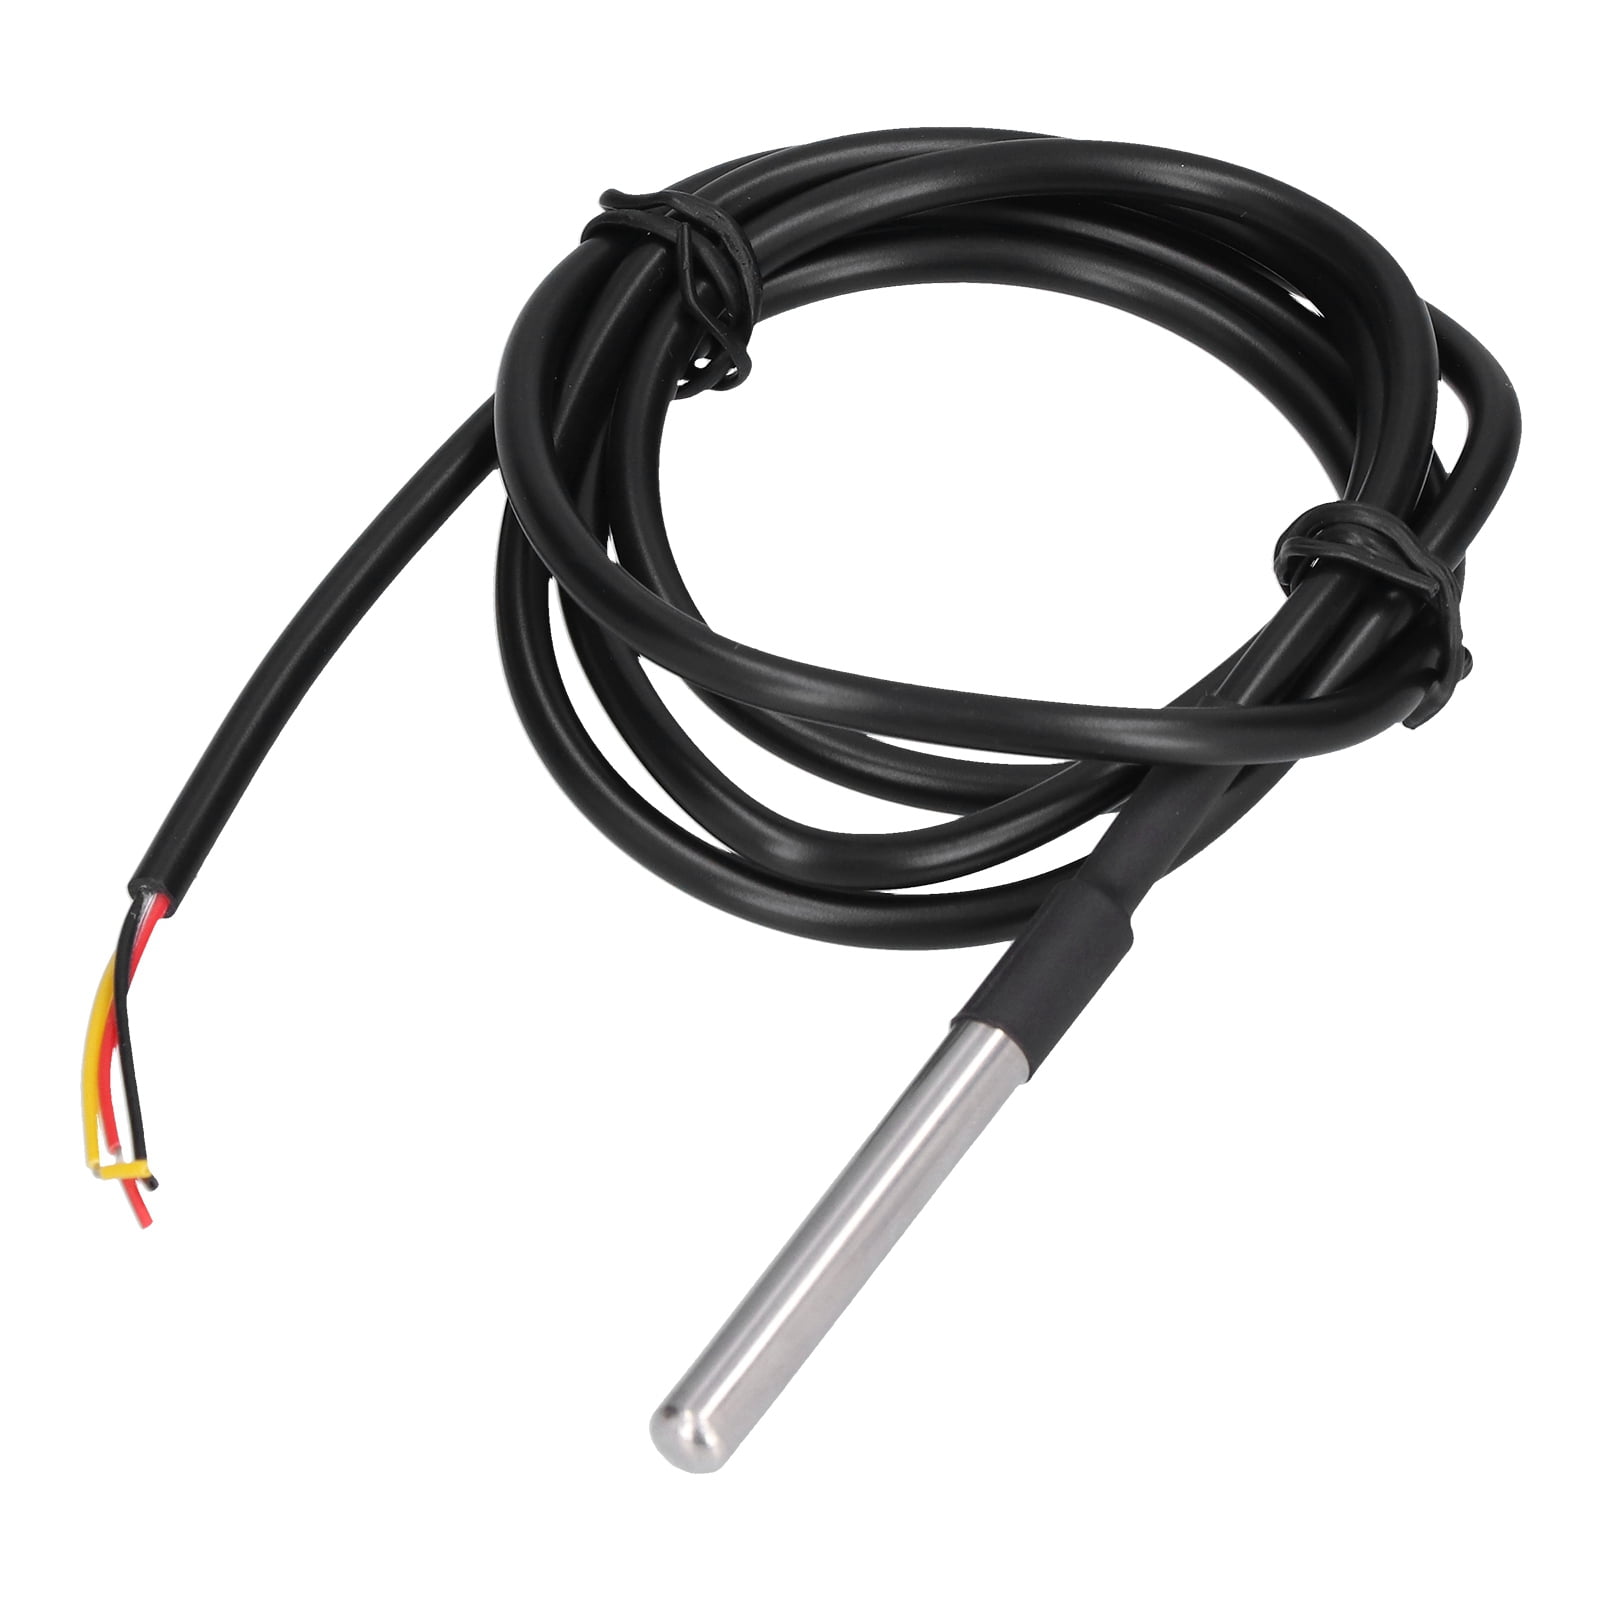 Probe Temperature Sensor Thermal Thermometer High Accuracy